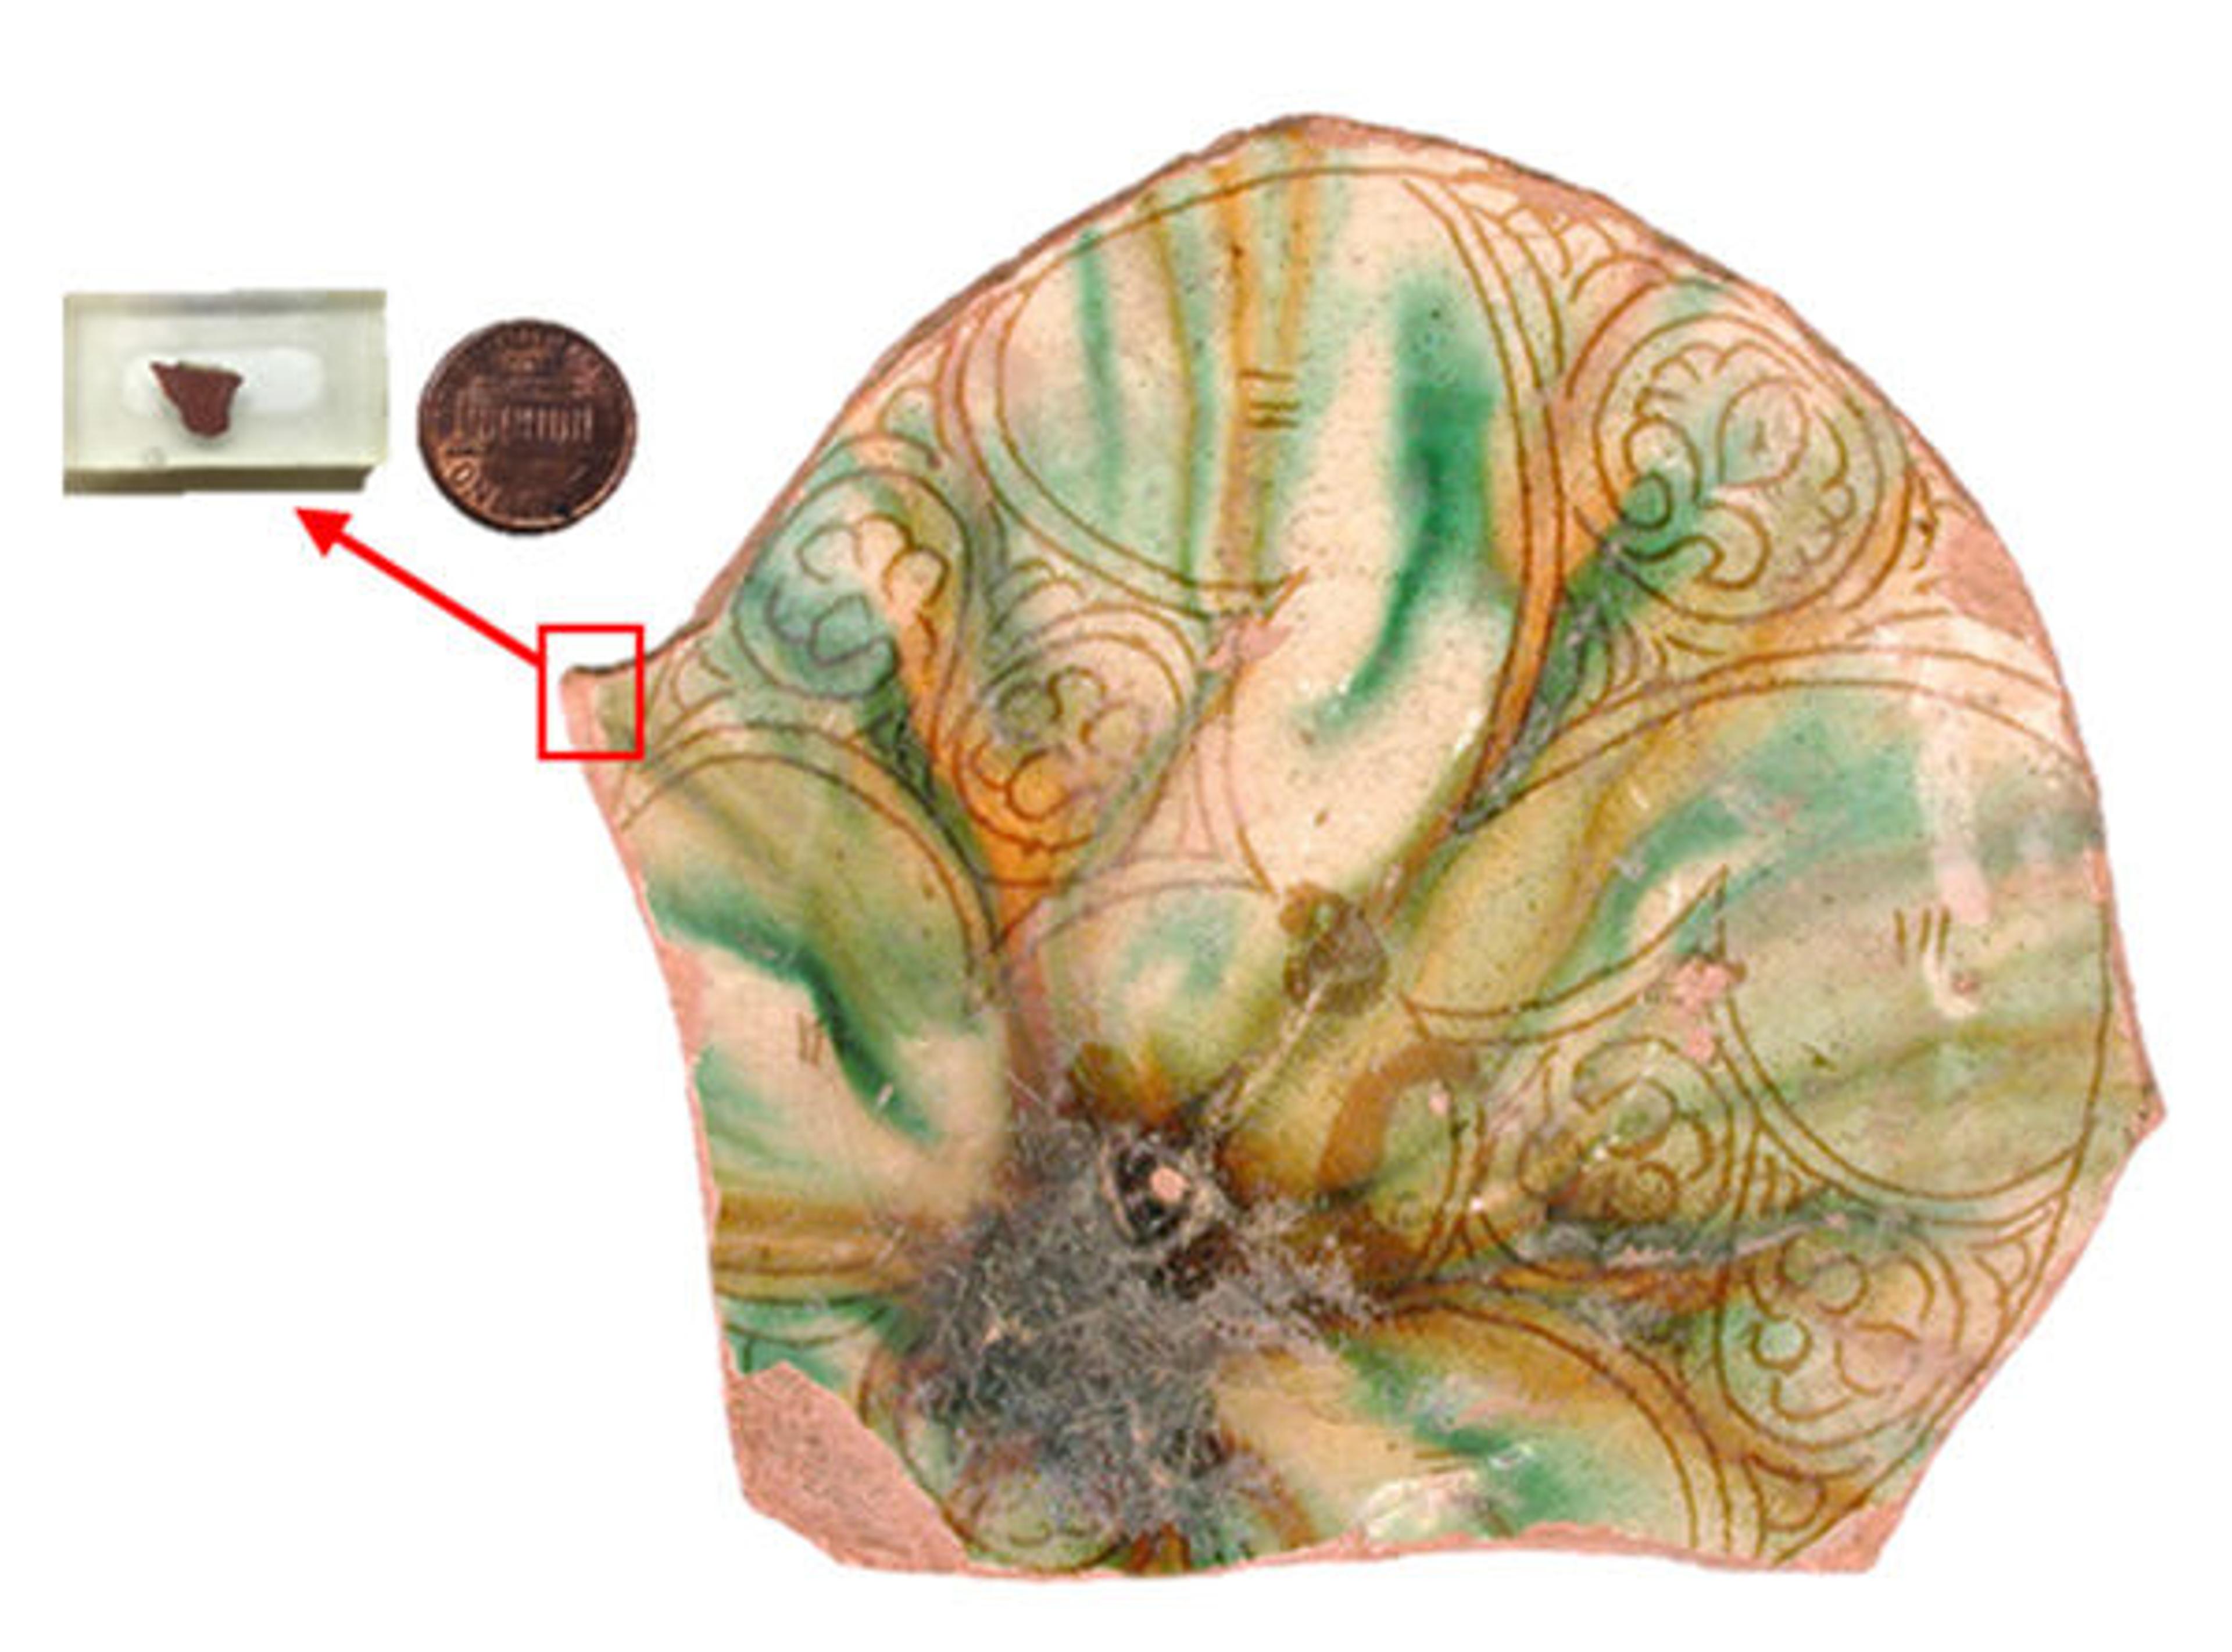 Fig. 2. Example of a sampling. A small sample is removed from a pottery shard, then embedded in a resin block, and its surface carefully polished following a well-established procedure.